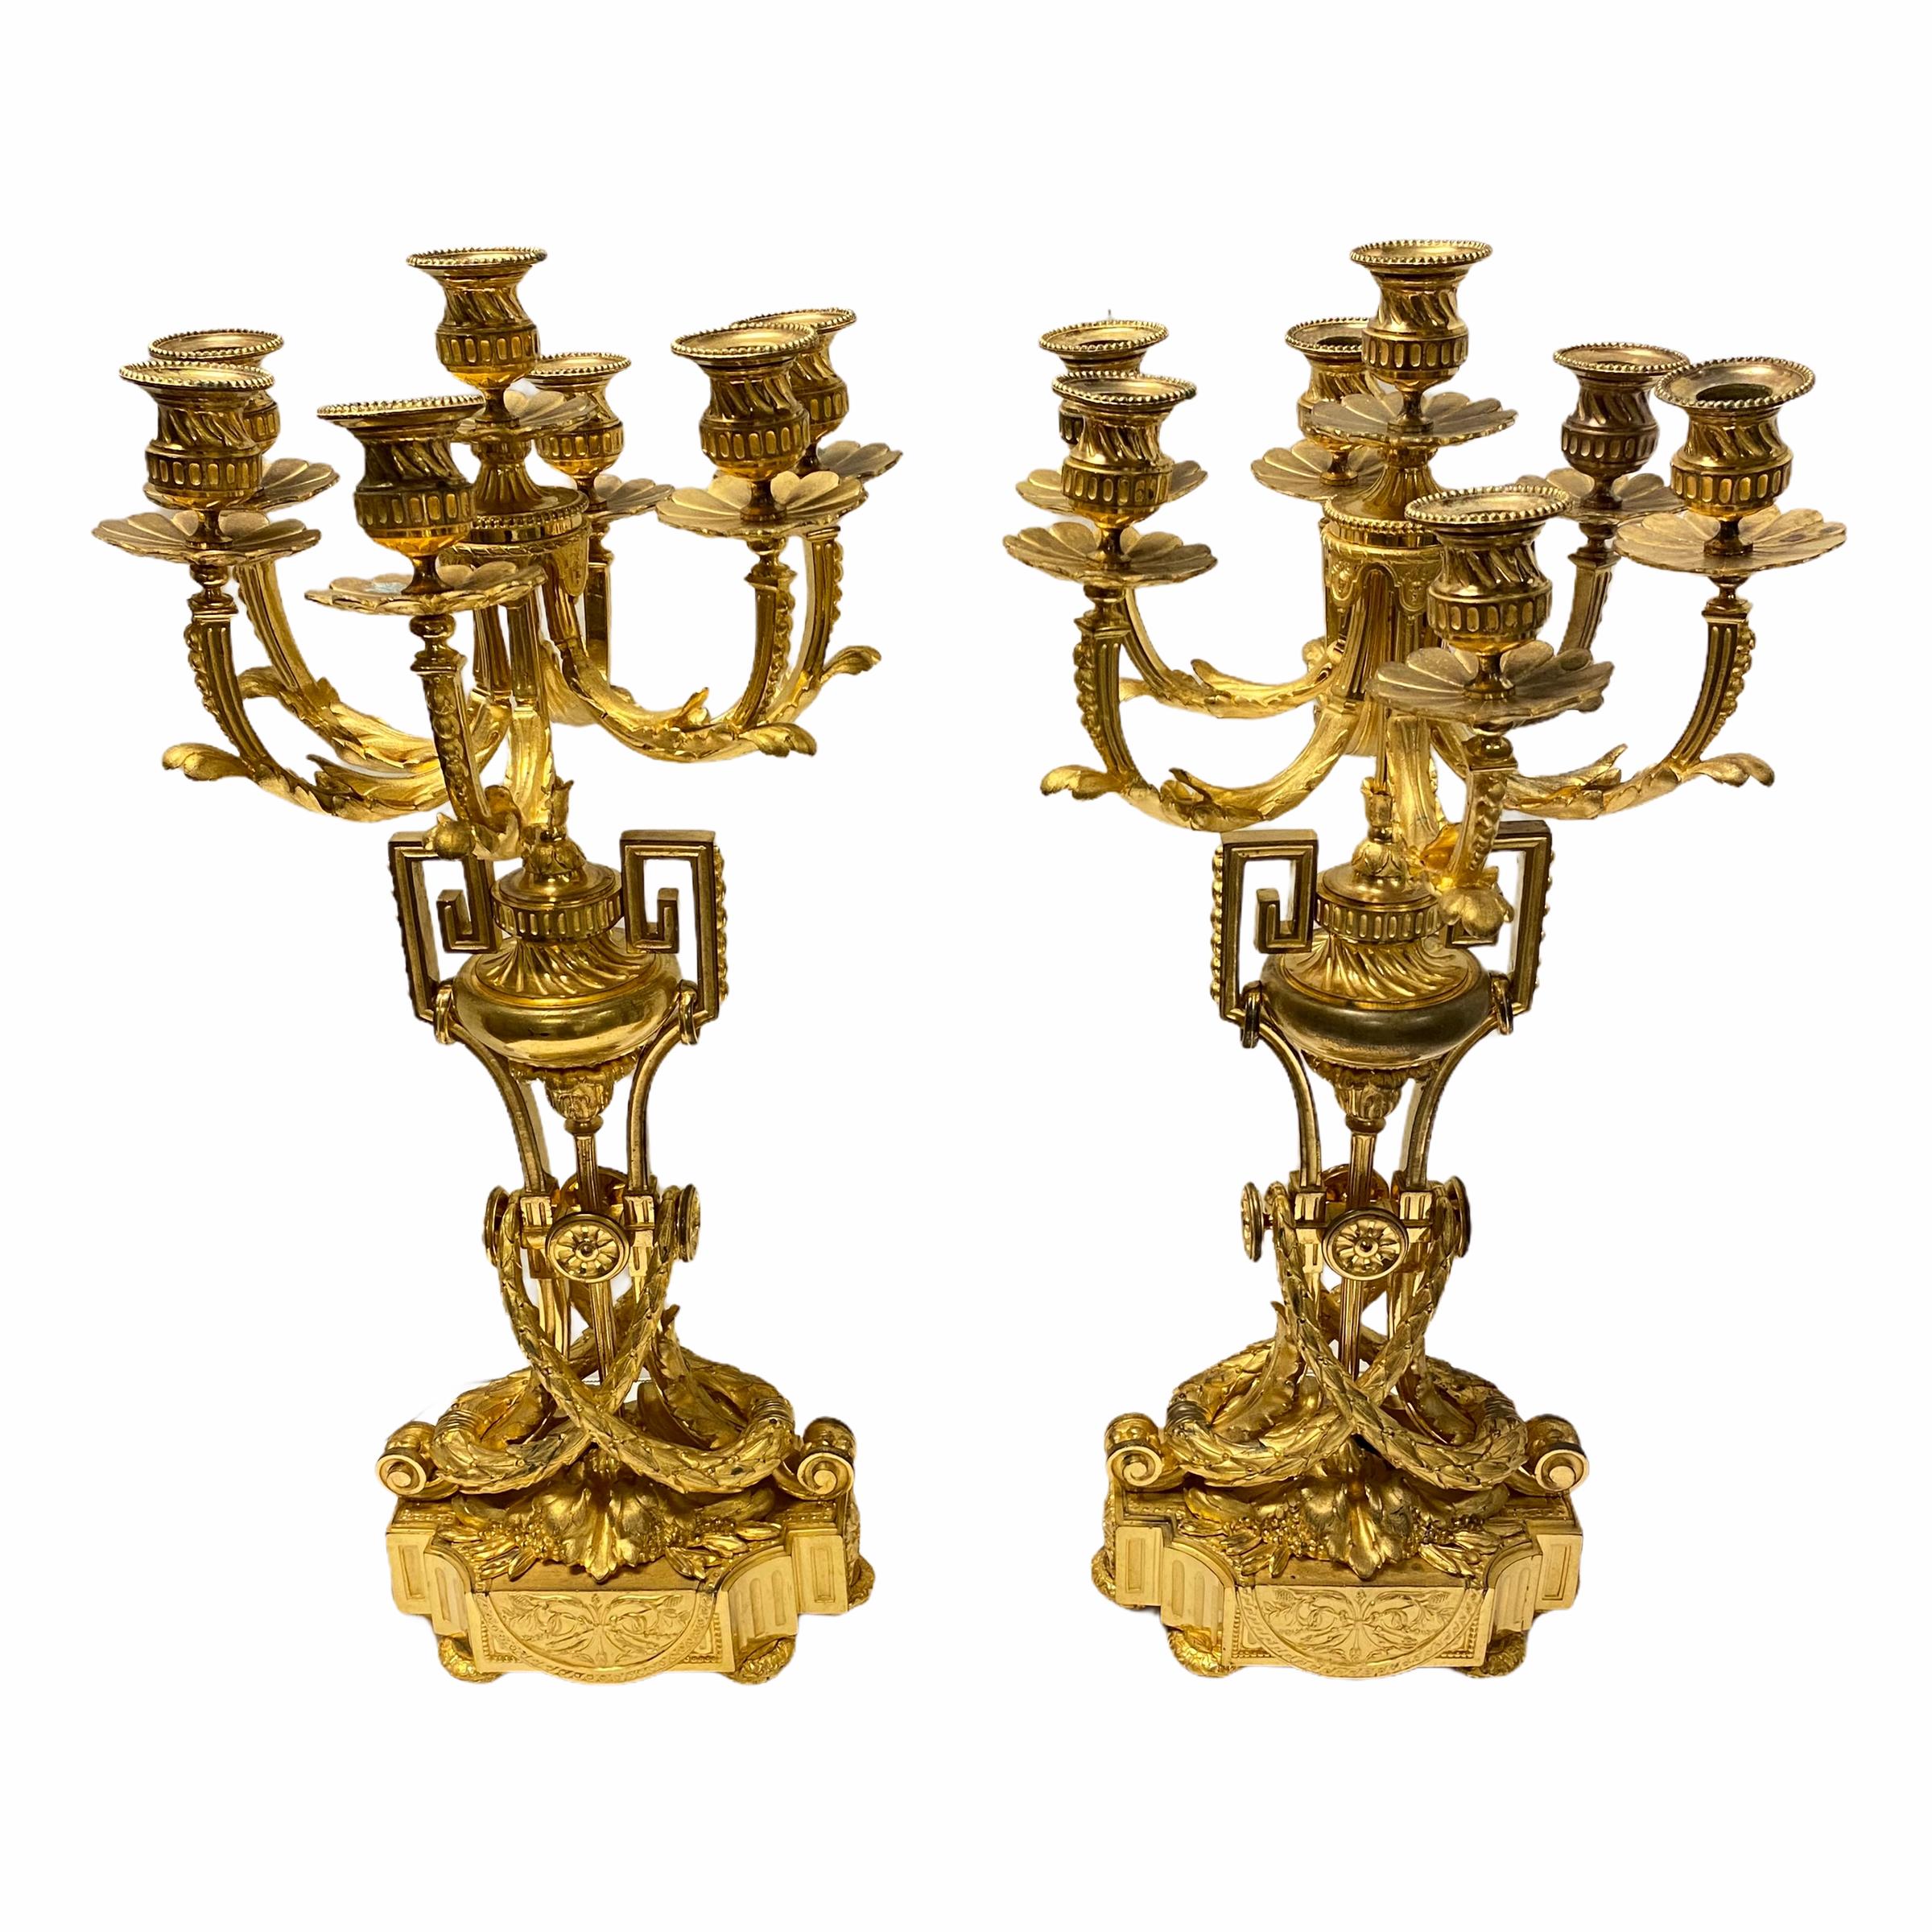 Pair of finest quality French 19 century Louis XIV style gilt bronze seven-light candelabras.